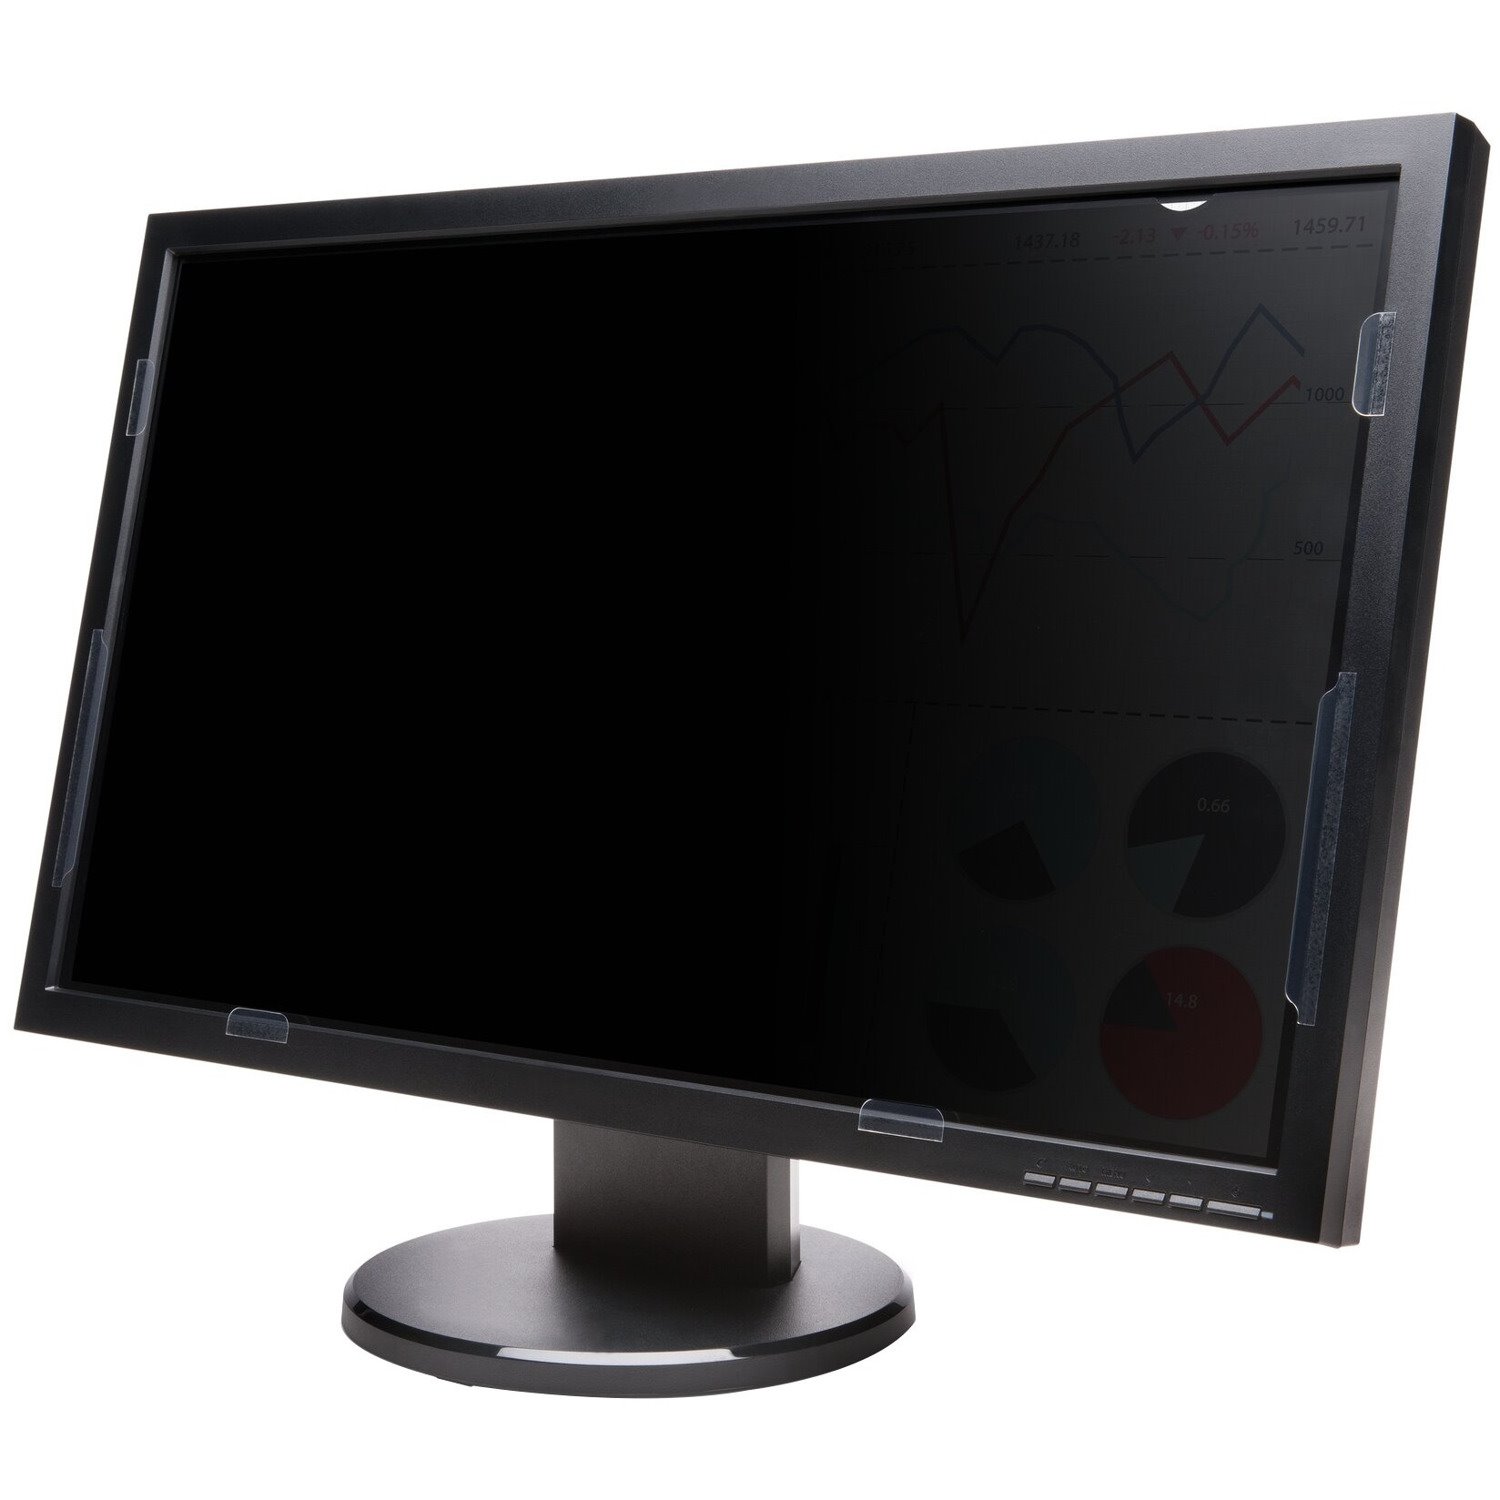 Kensington FP250W9 Privacy Screen for Monitors (25" 16:9) Tinted Clear